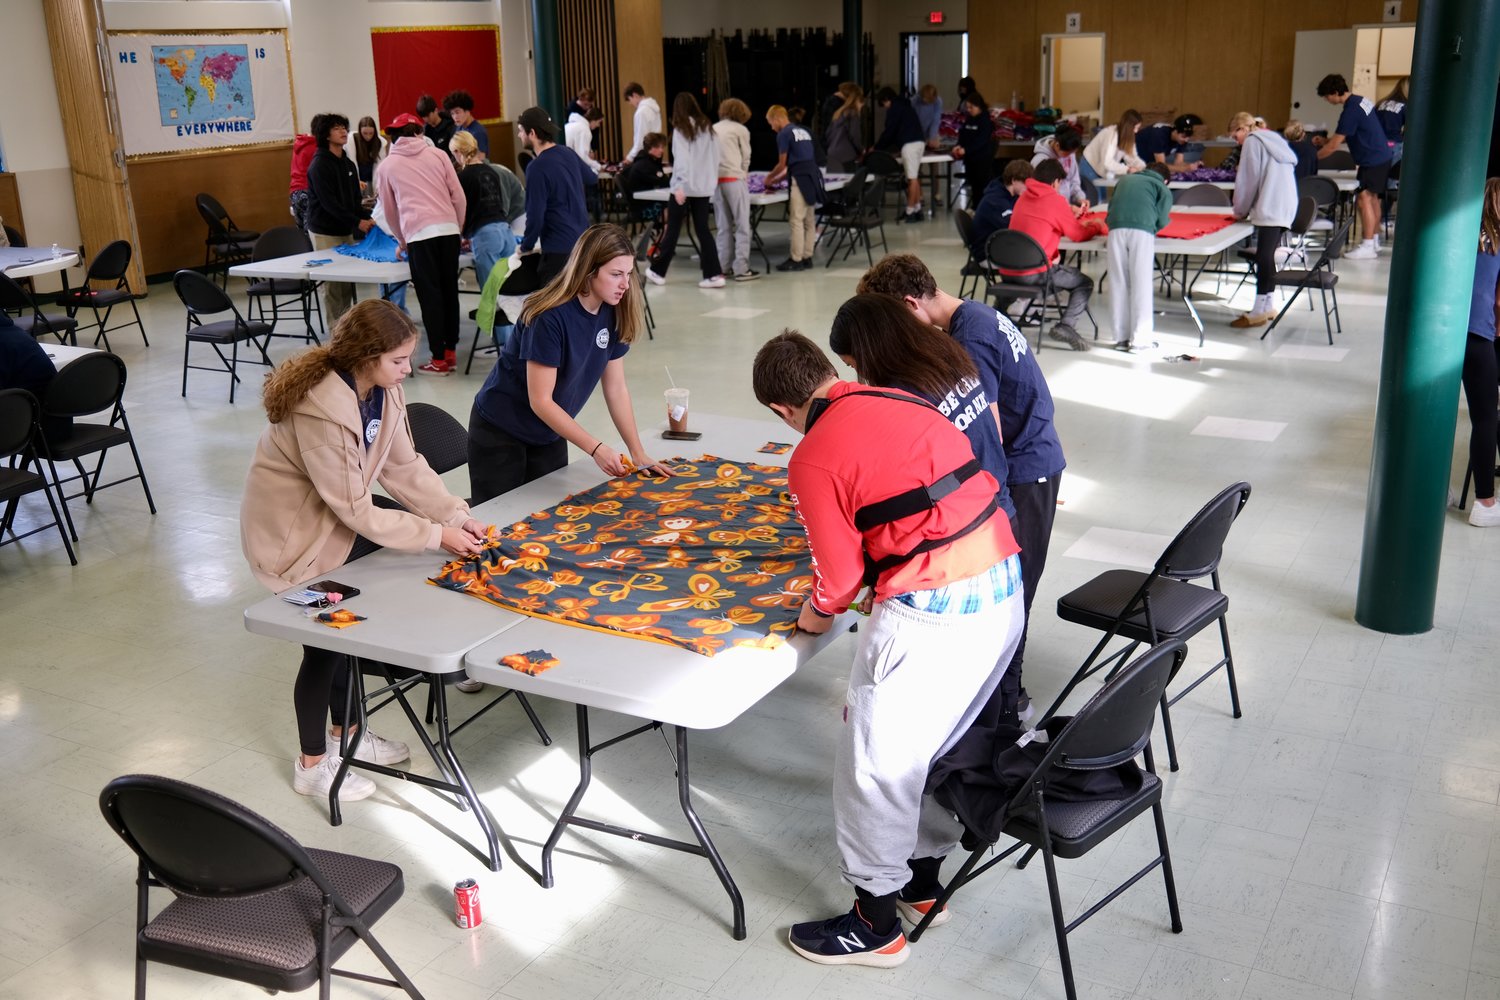 About 80 Every Student Initiative members turned out to St. Barnabas Church on Sunday to make blankets for children with cancer.